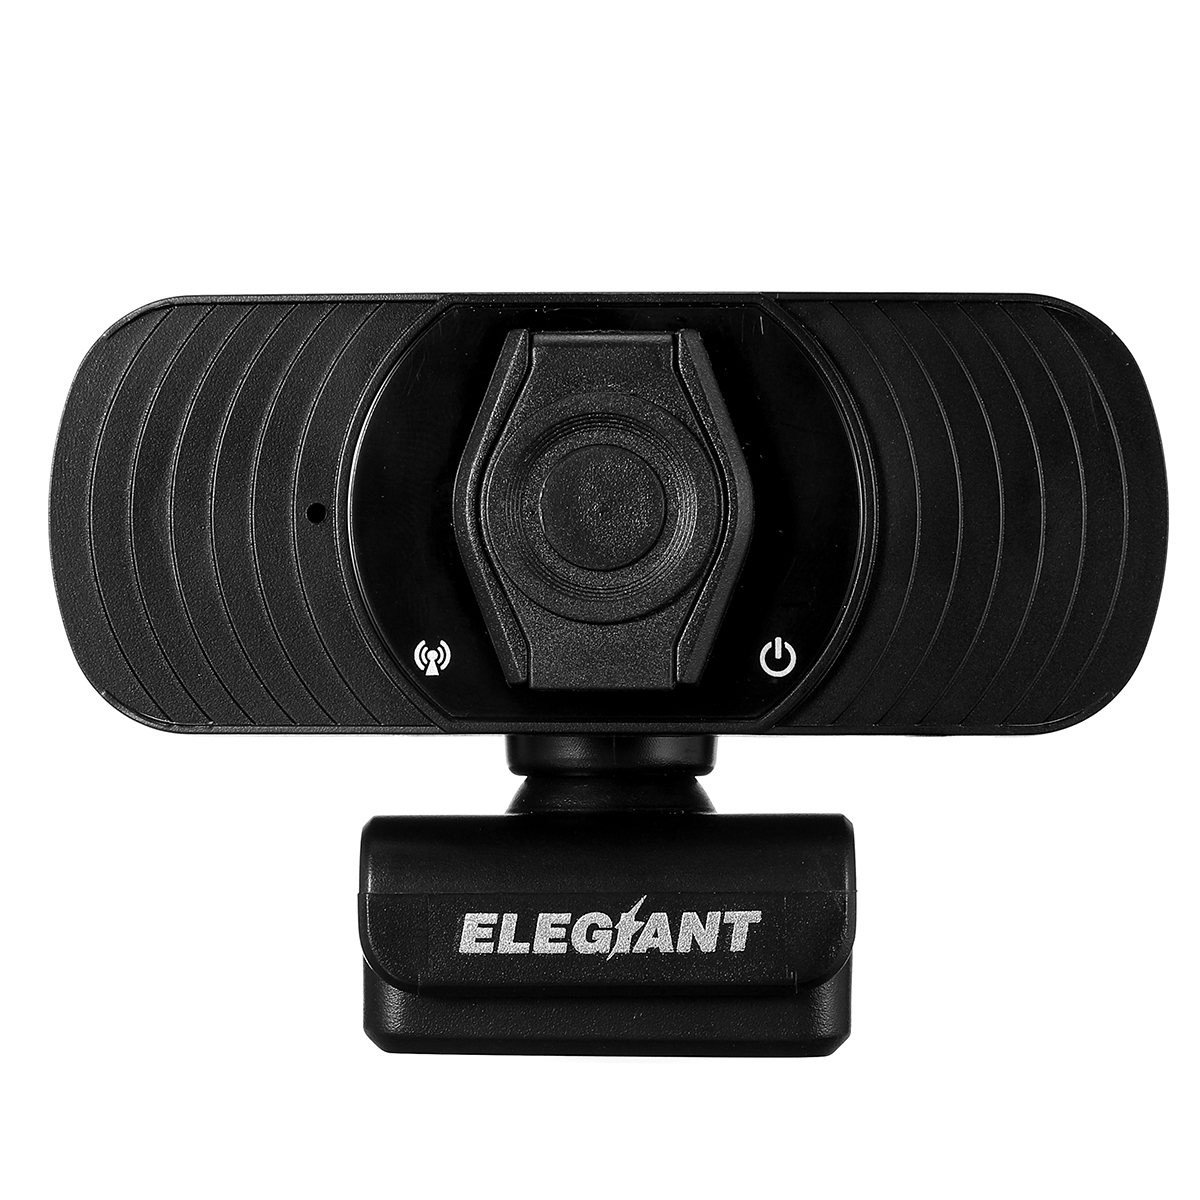 Find ELEGIANT EGC C01 1080P HD Webcam with Privacy Cover Built in Mic for Video Calls Conference Gaming USB Plug Play for Windows for Mac OS Android for Sale on Gipsybee.com with cryptocurrencies